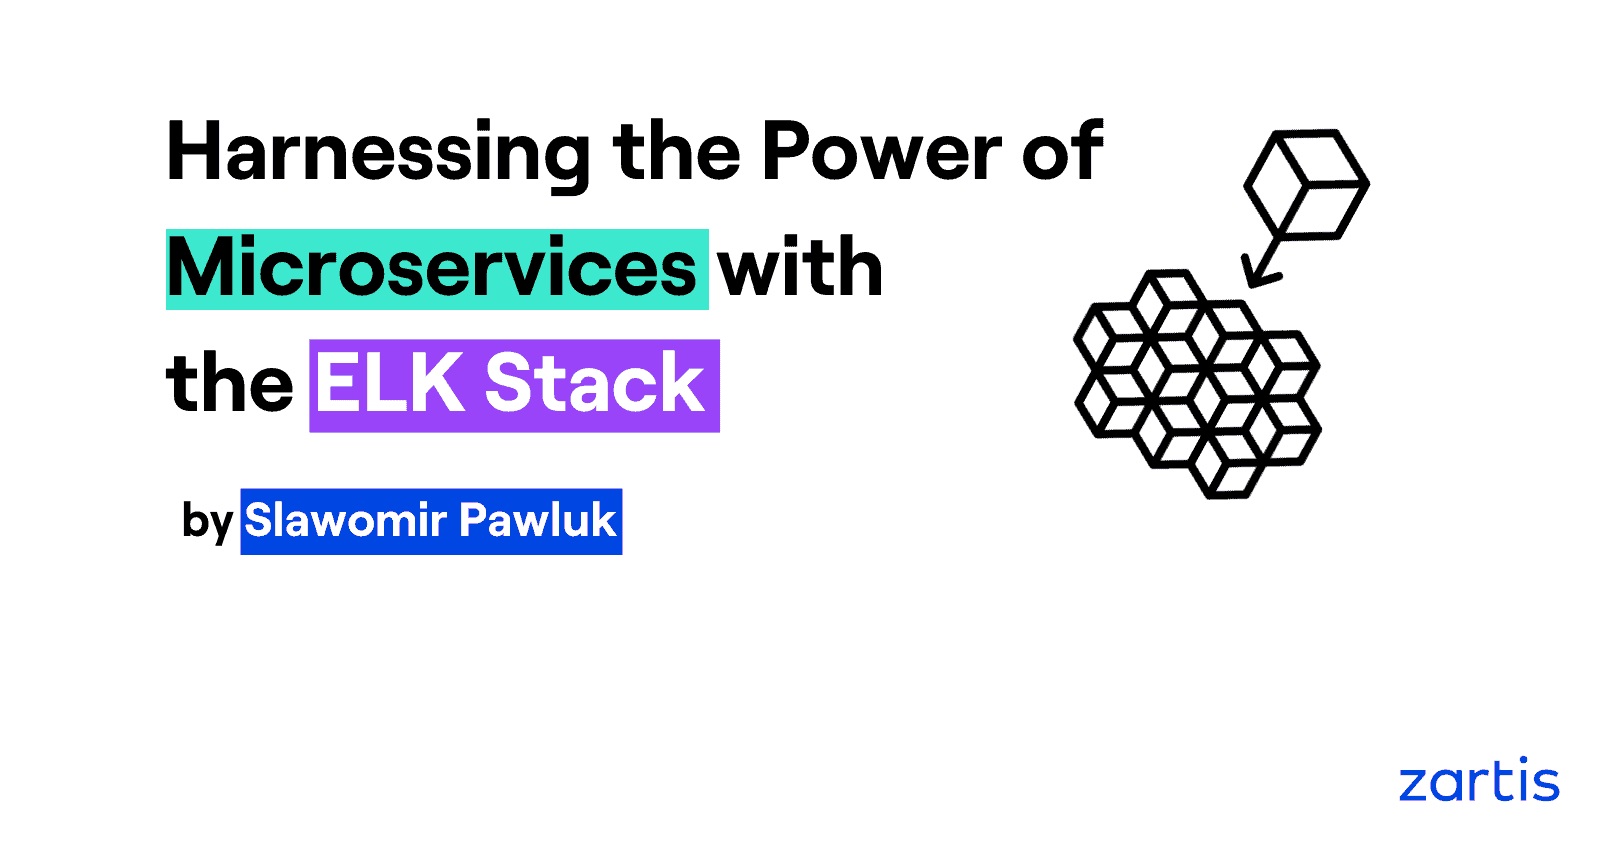 Harnessing the Power of Microservices with the ELK Stack written by Slawomir Pawluk, who works as an outsourced Software Developer at Zartis